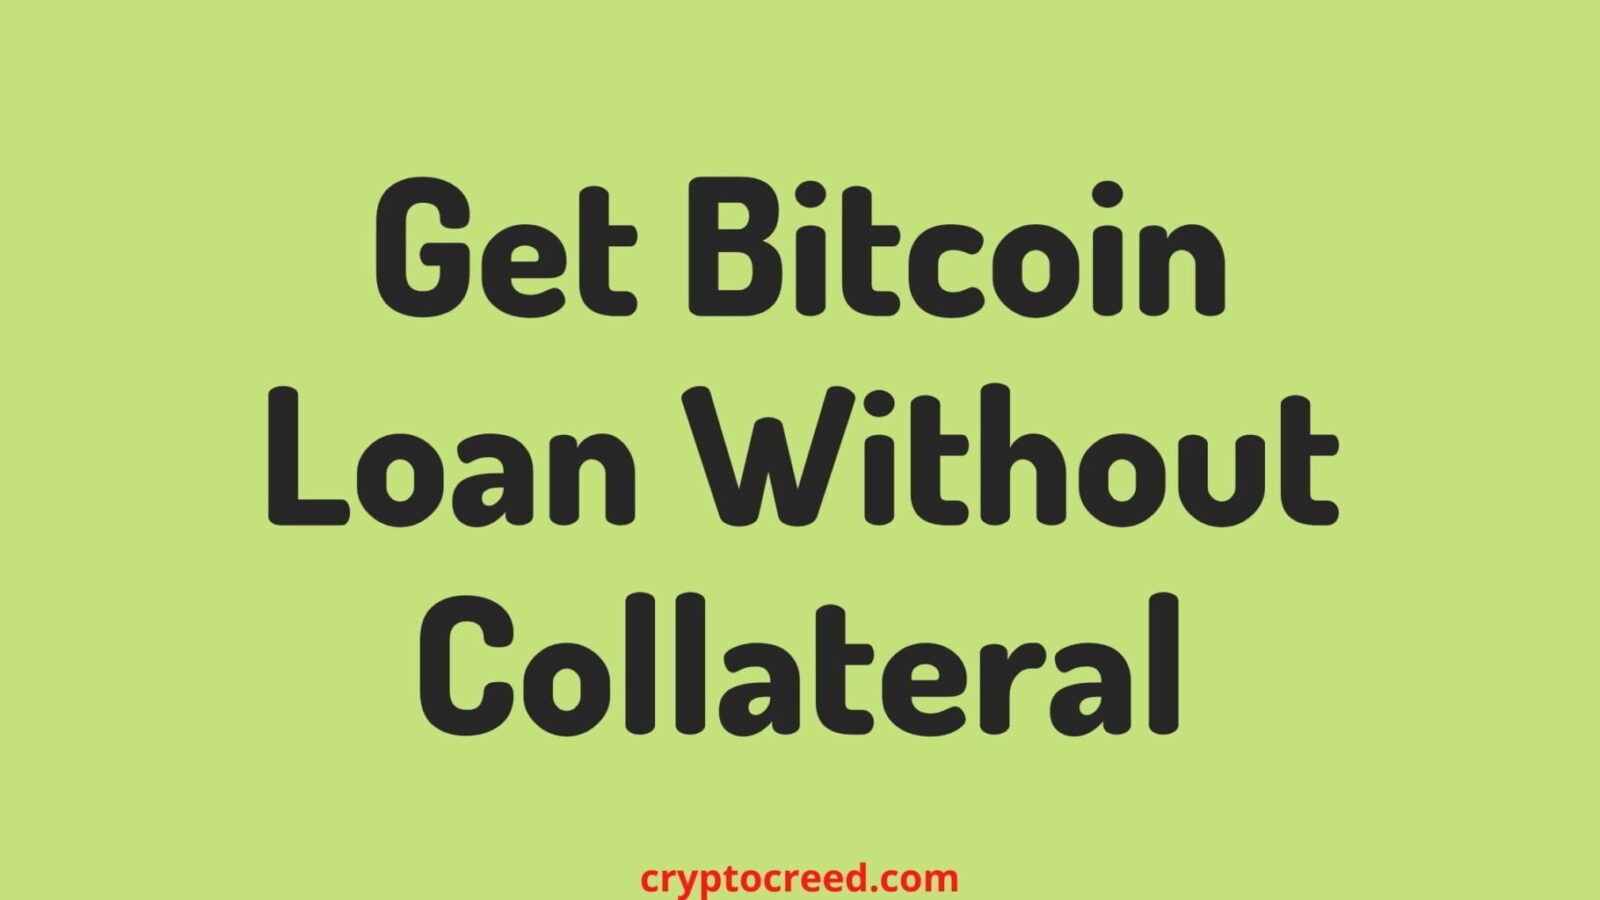 how to get bitcoin loan